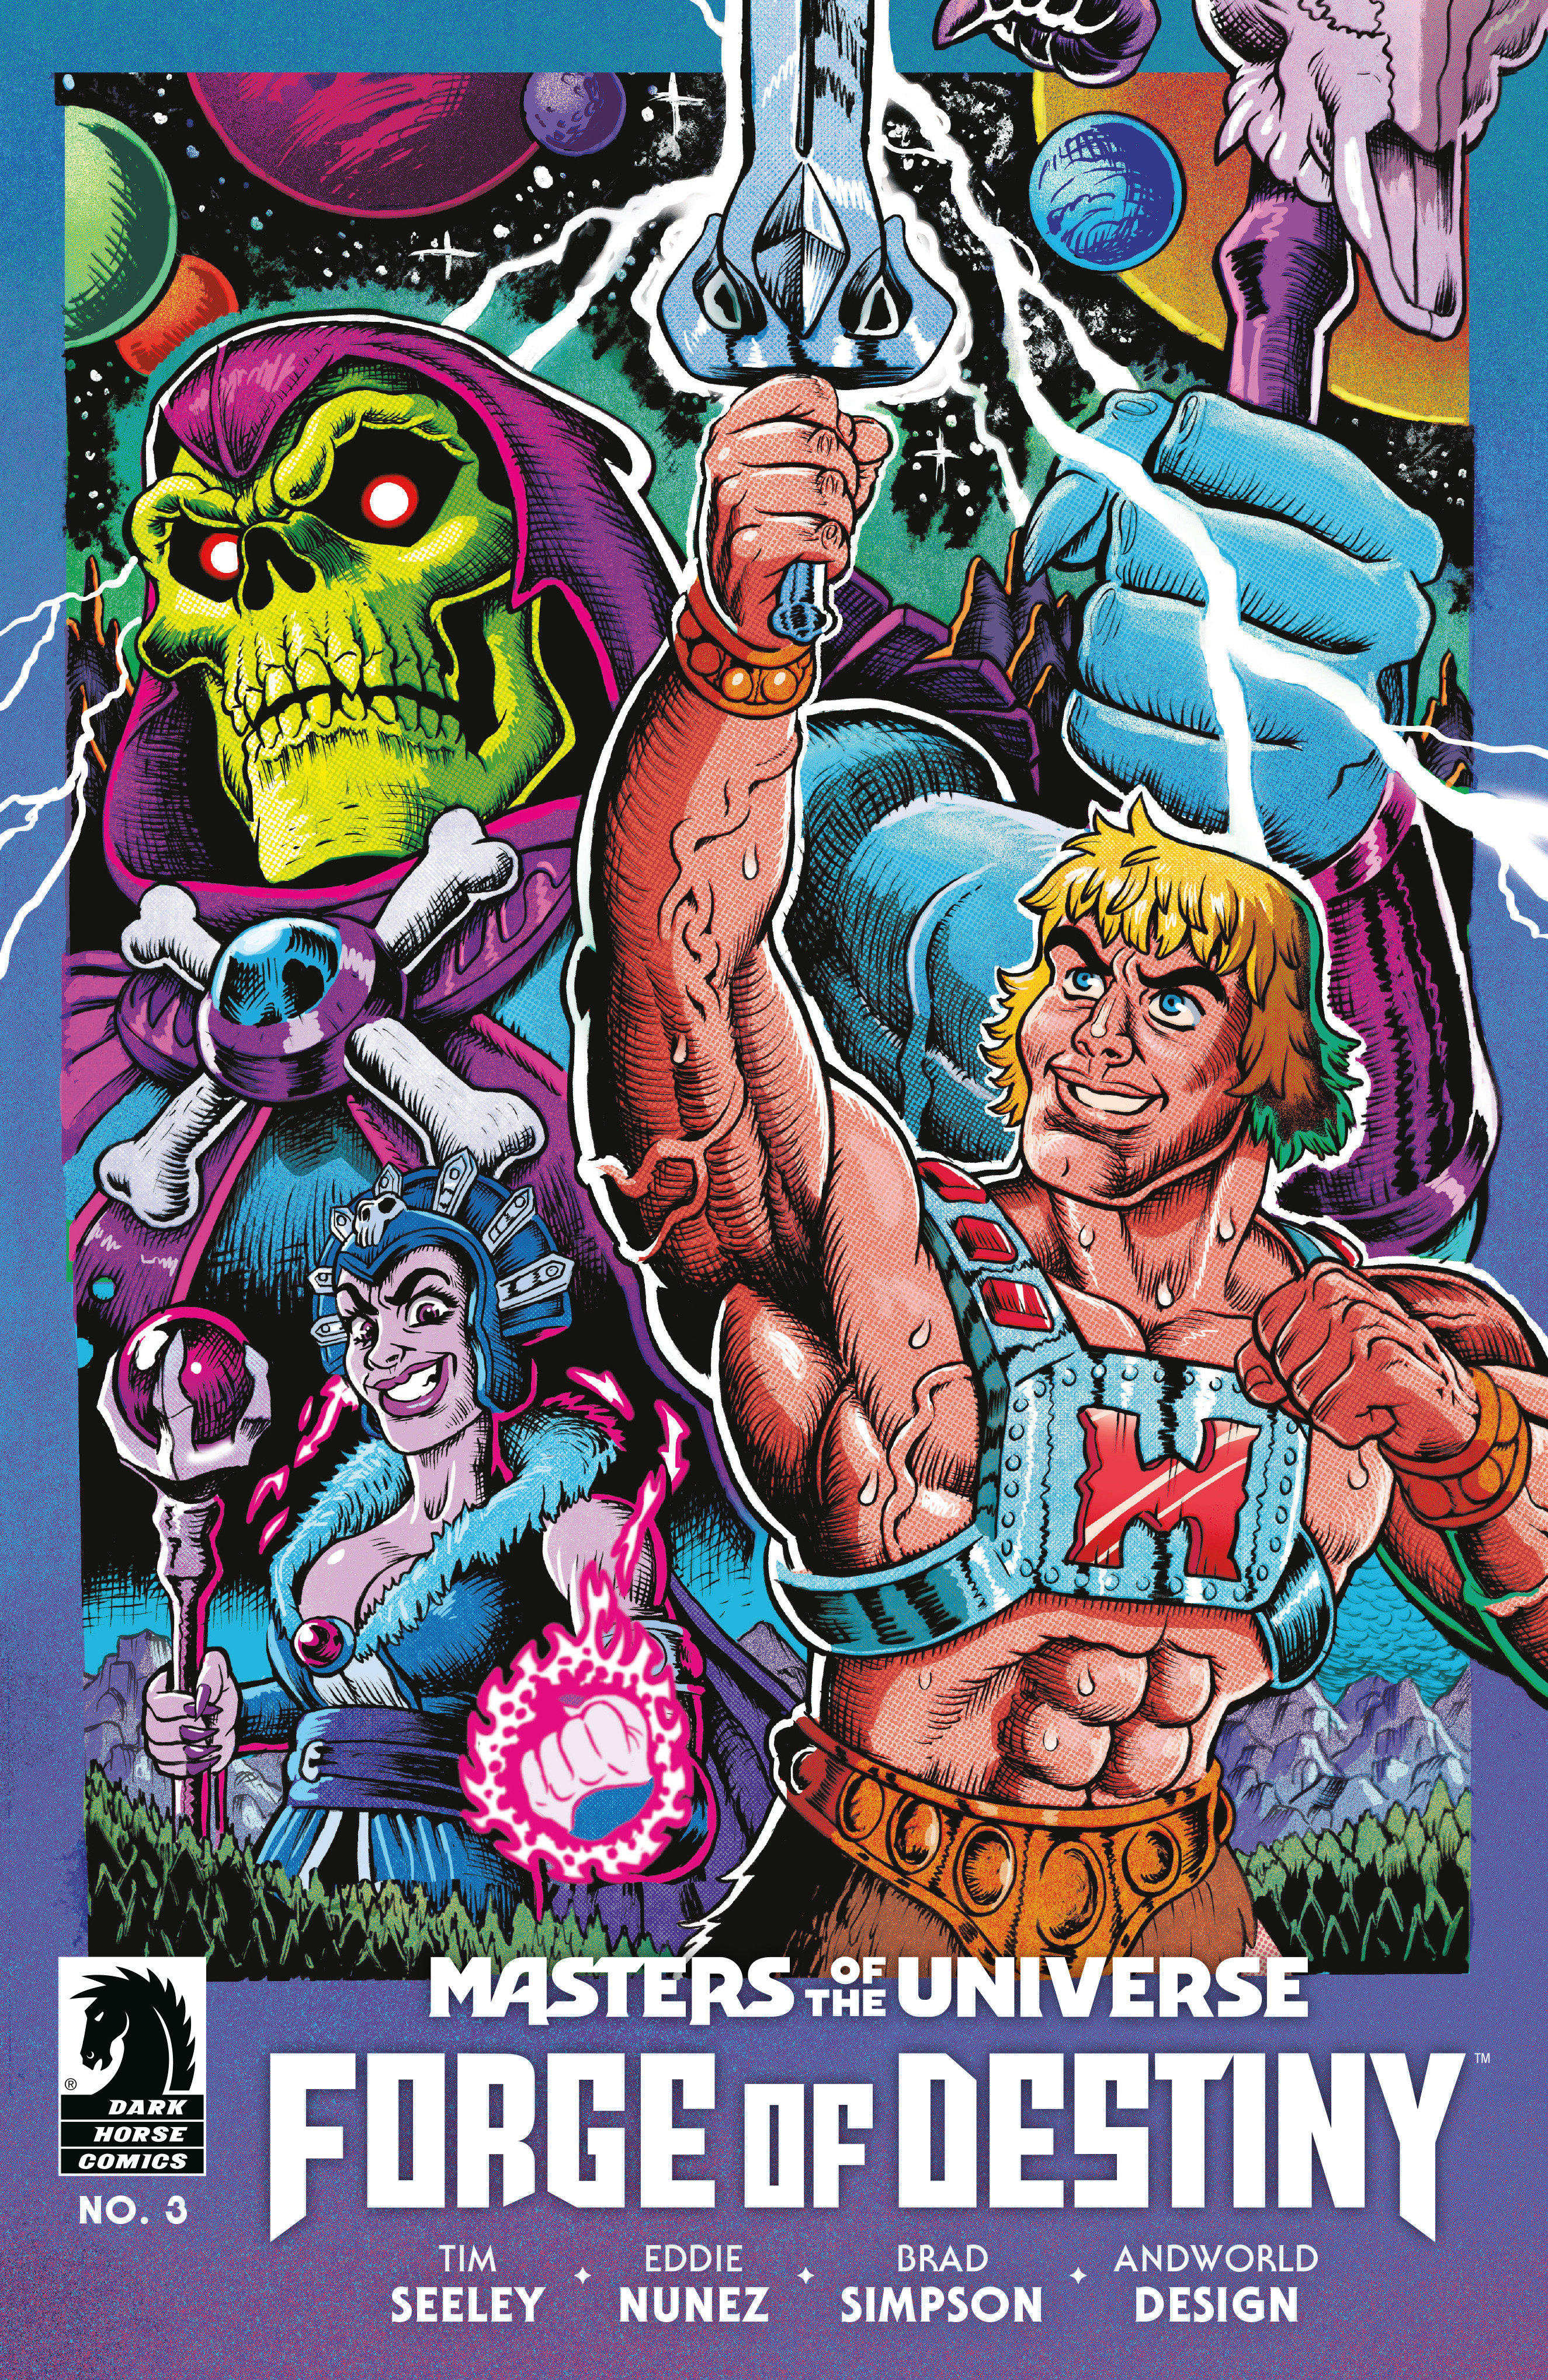 Masters of the Universe: Forge of Destiny #3 Cover C (Jake Smith)